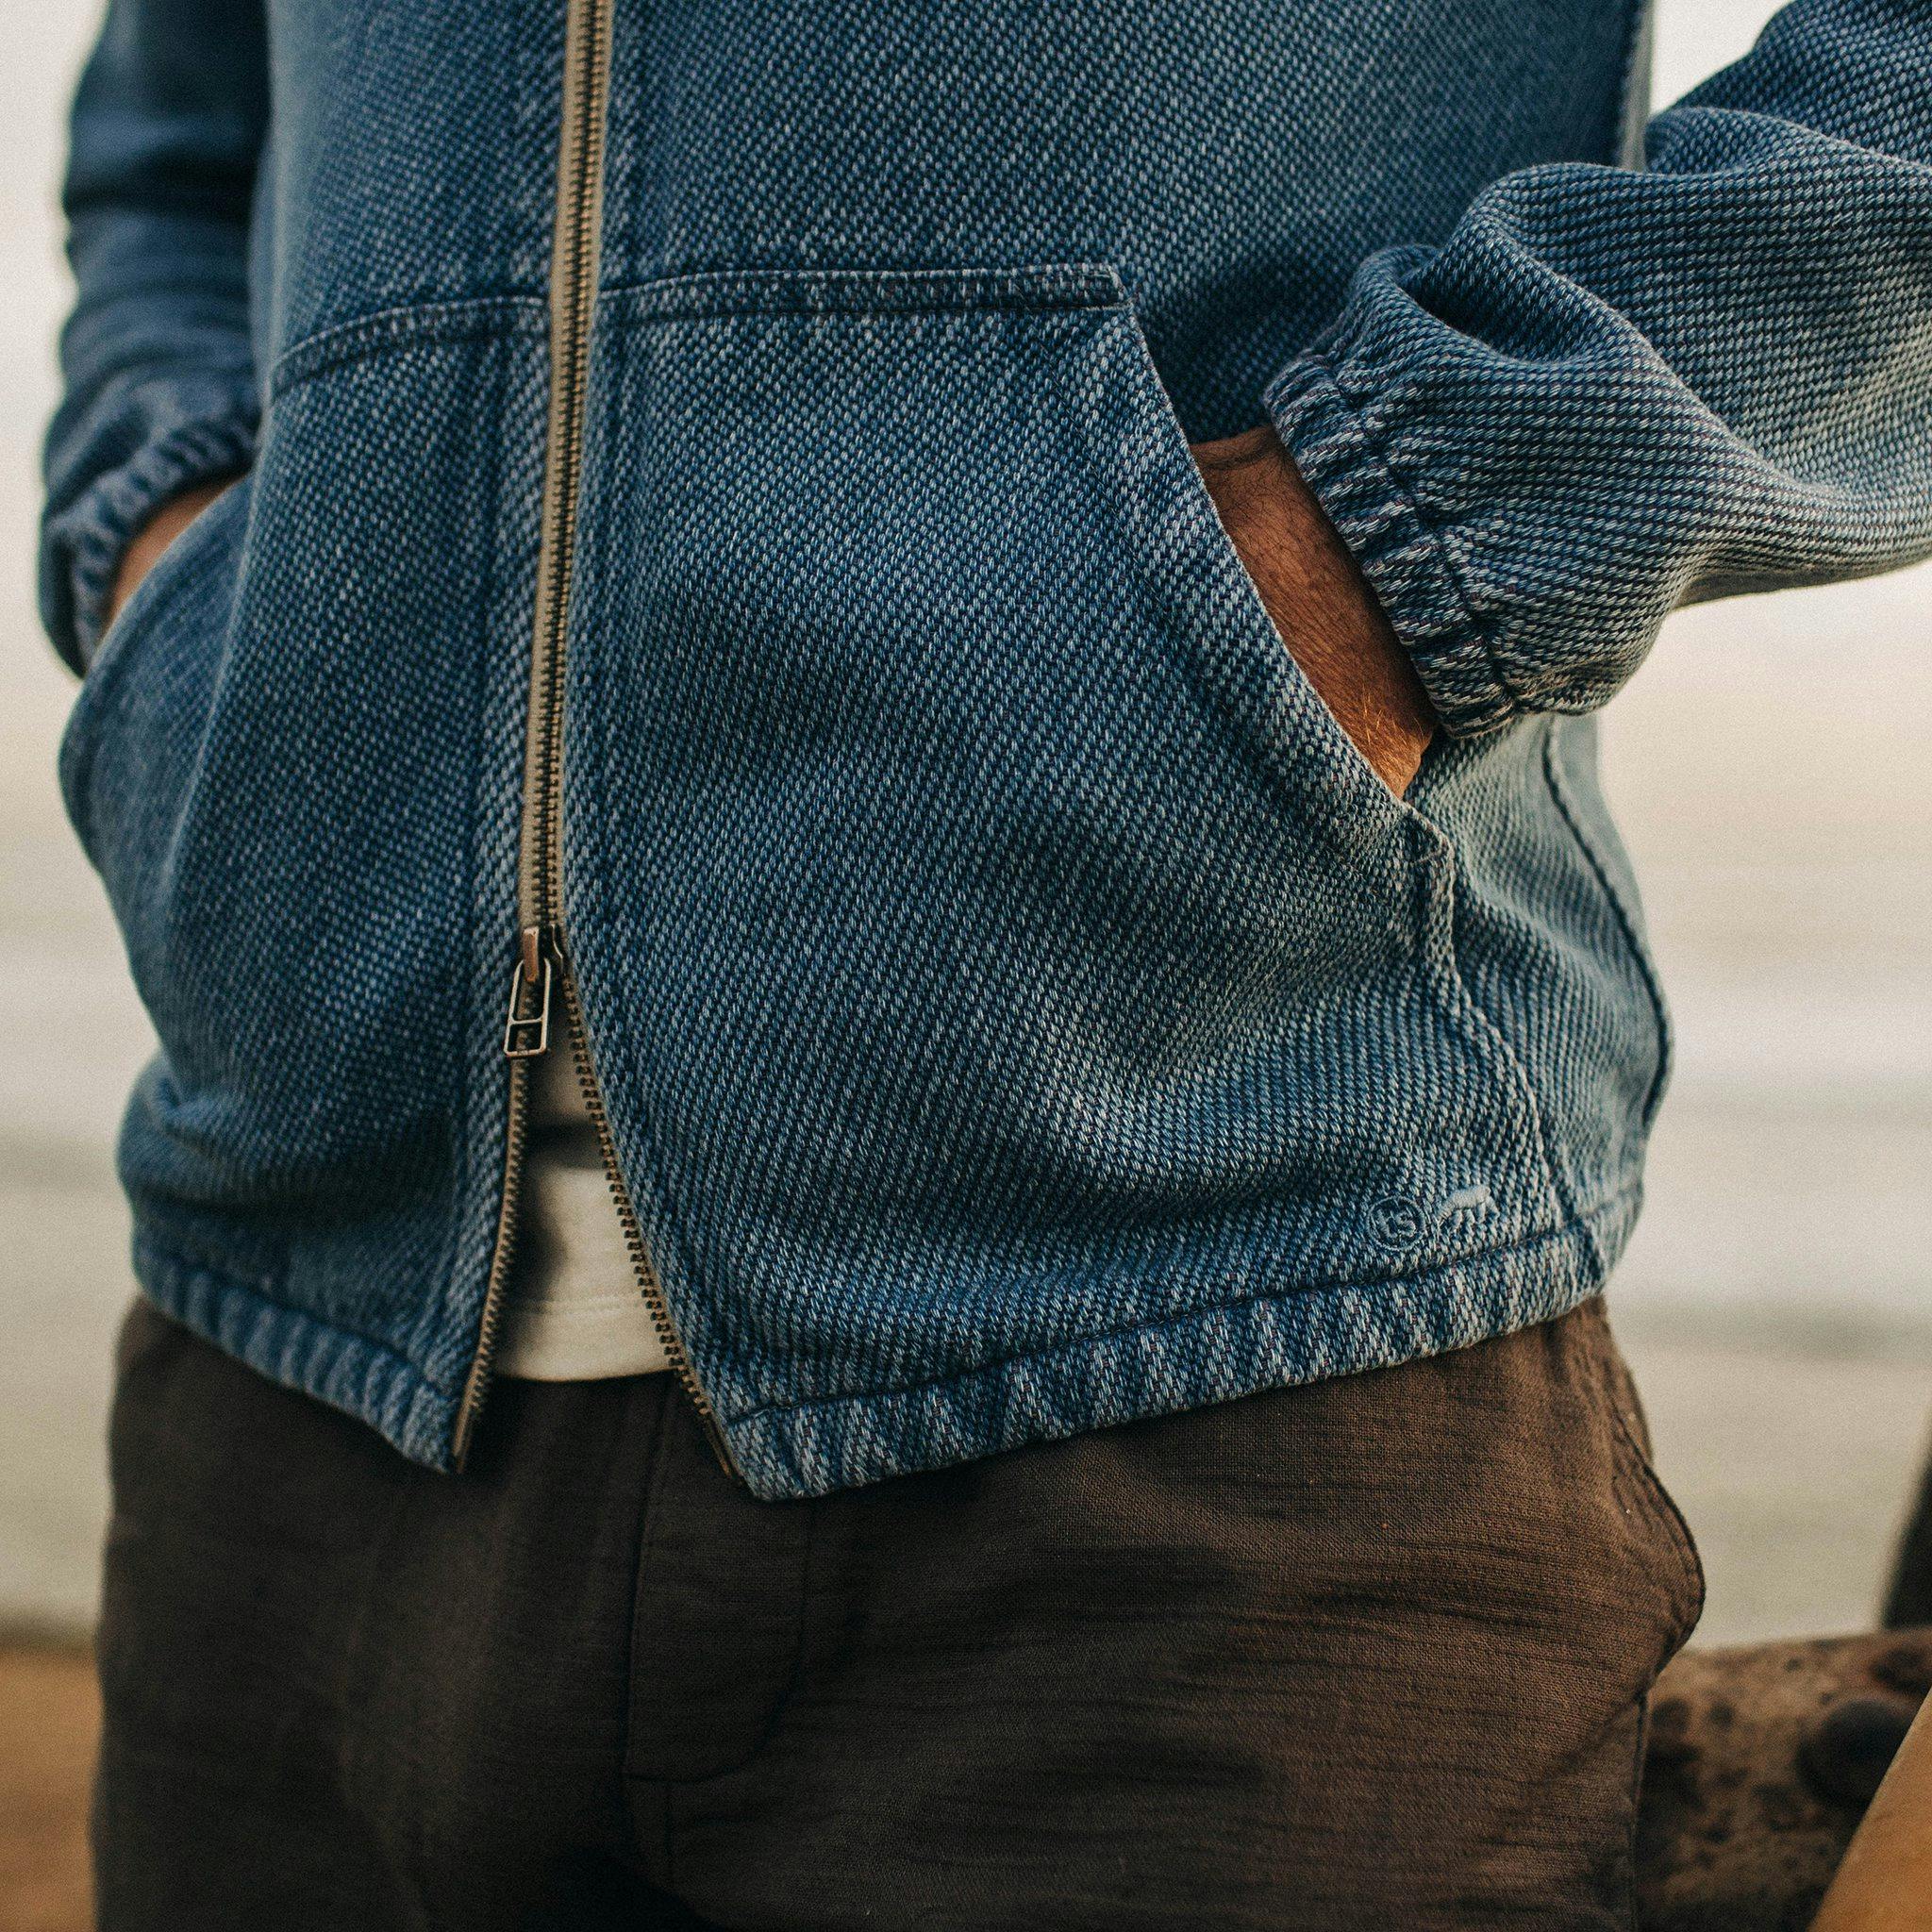 The Taylor Stitch Riptide Jacket is Your New Go-To Getaway Hoodie